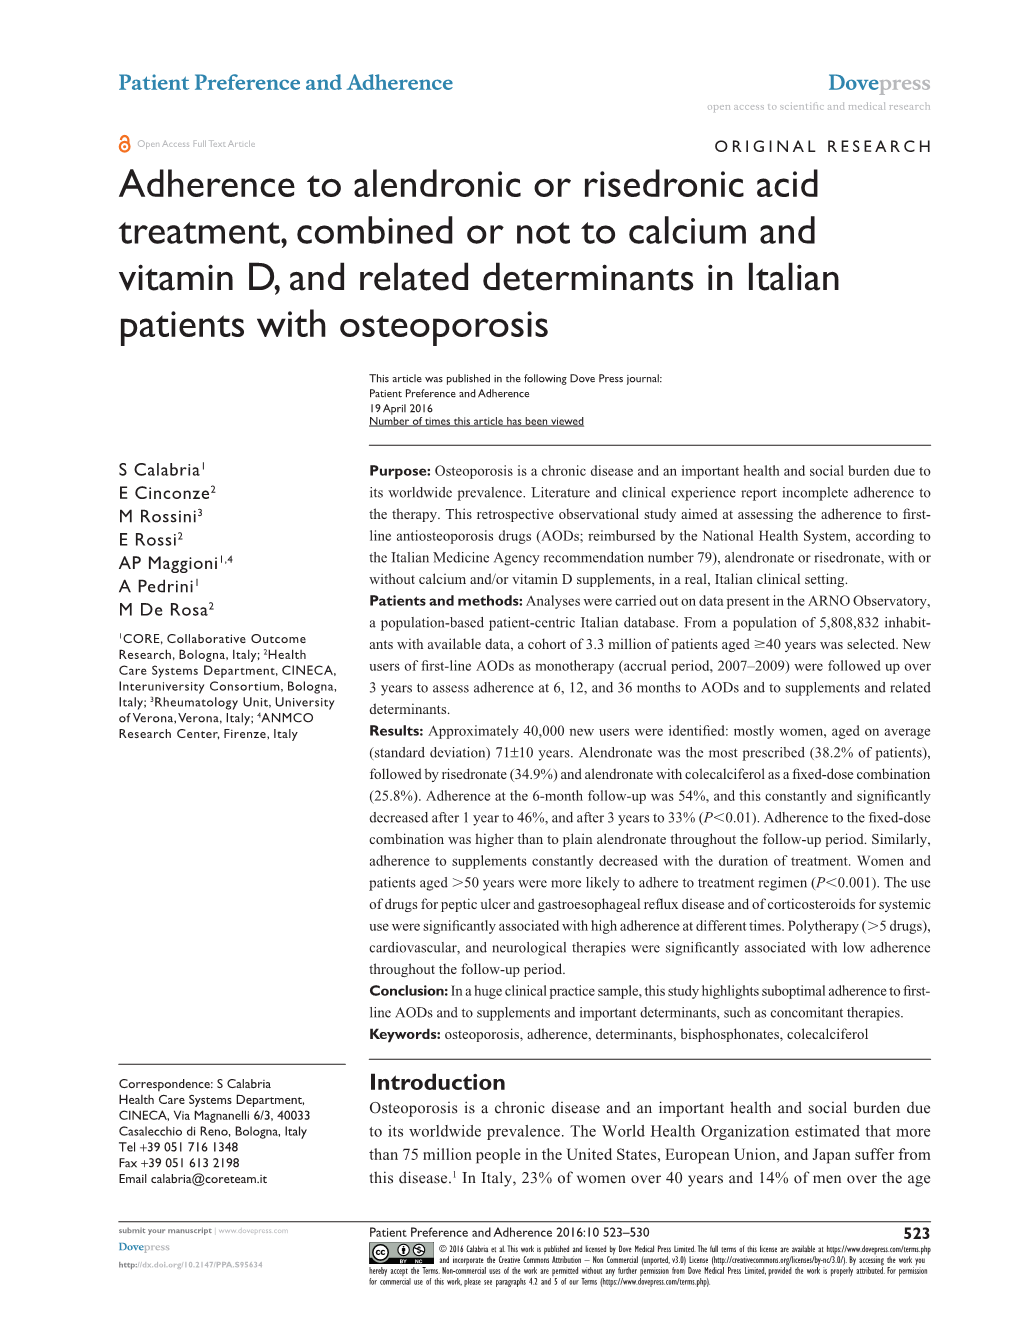 Adherence to Alendronic Or Risedronic Acid Treatment, Combined Or Not to Calcium and Vitamin D, and Related Determinants in Italian Patients with Osteoporosis